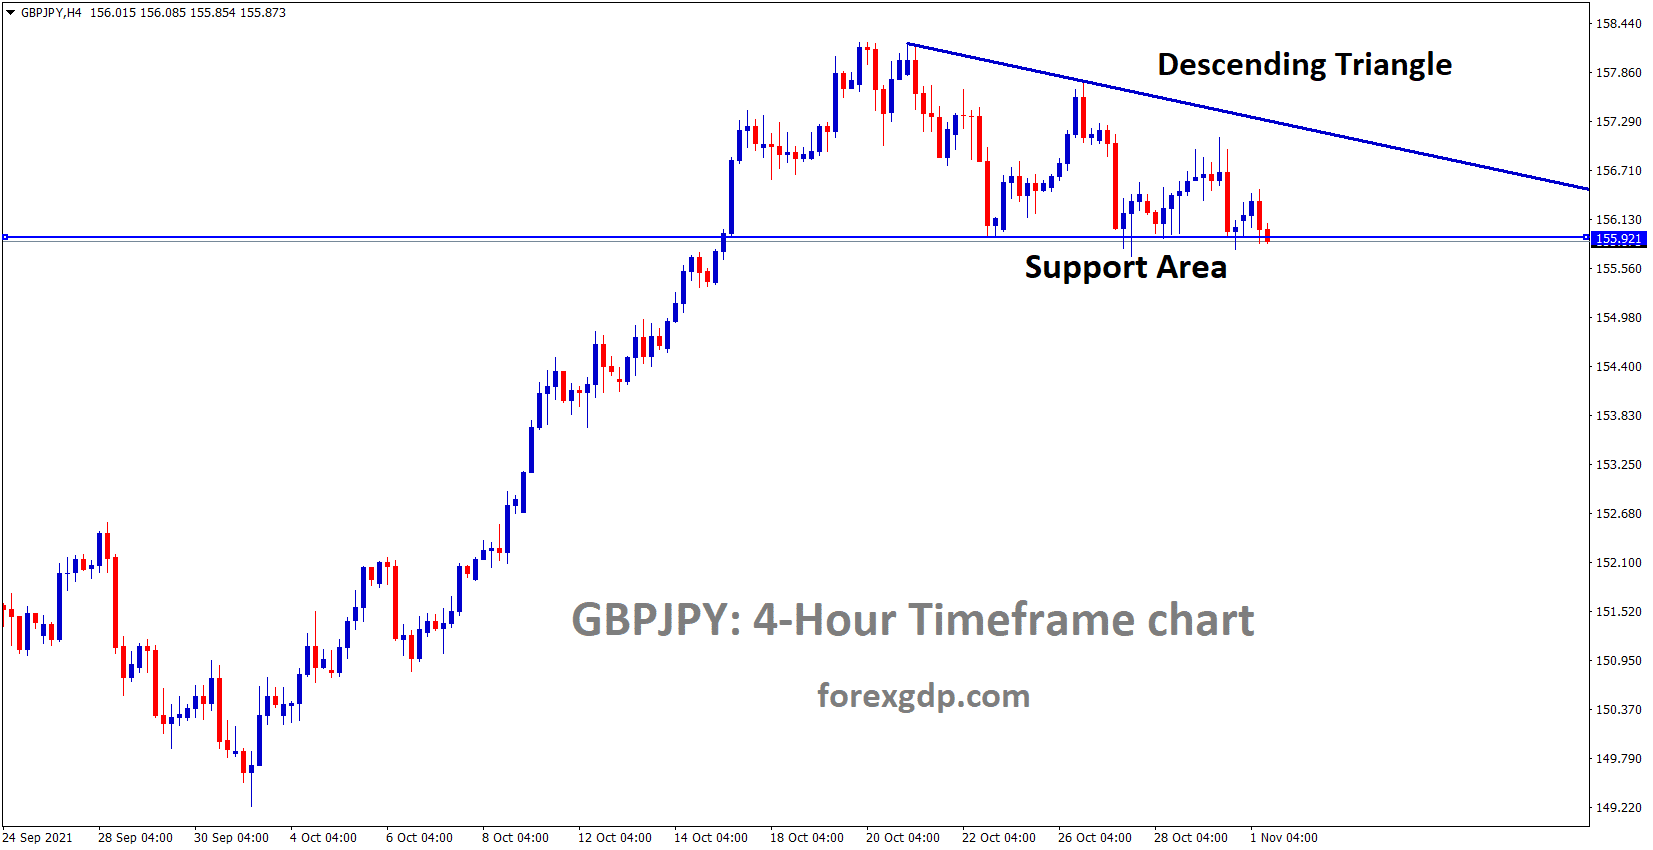 GBPJPY is moving in the Descending Triangle pattern and market standing at the minor recent support level of Triangle pattern